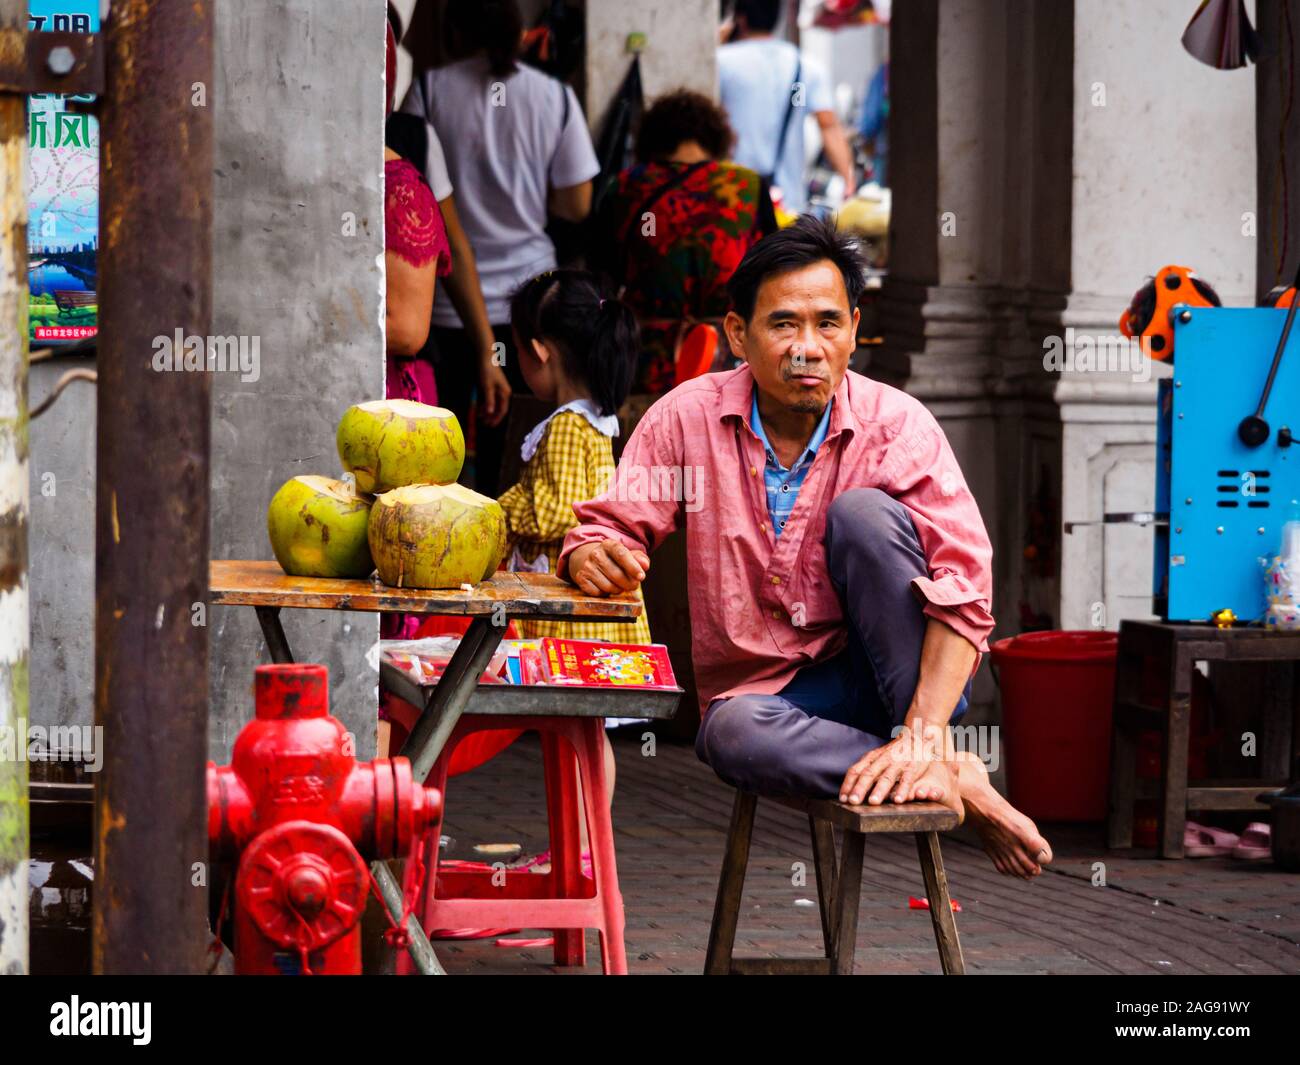 HAIKOU, HAINAN, CHINA - MAR 2 2019 - A street vendor selling fresh coconuts containing coconut water, a popular tropical beverage. Stock Photo